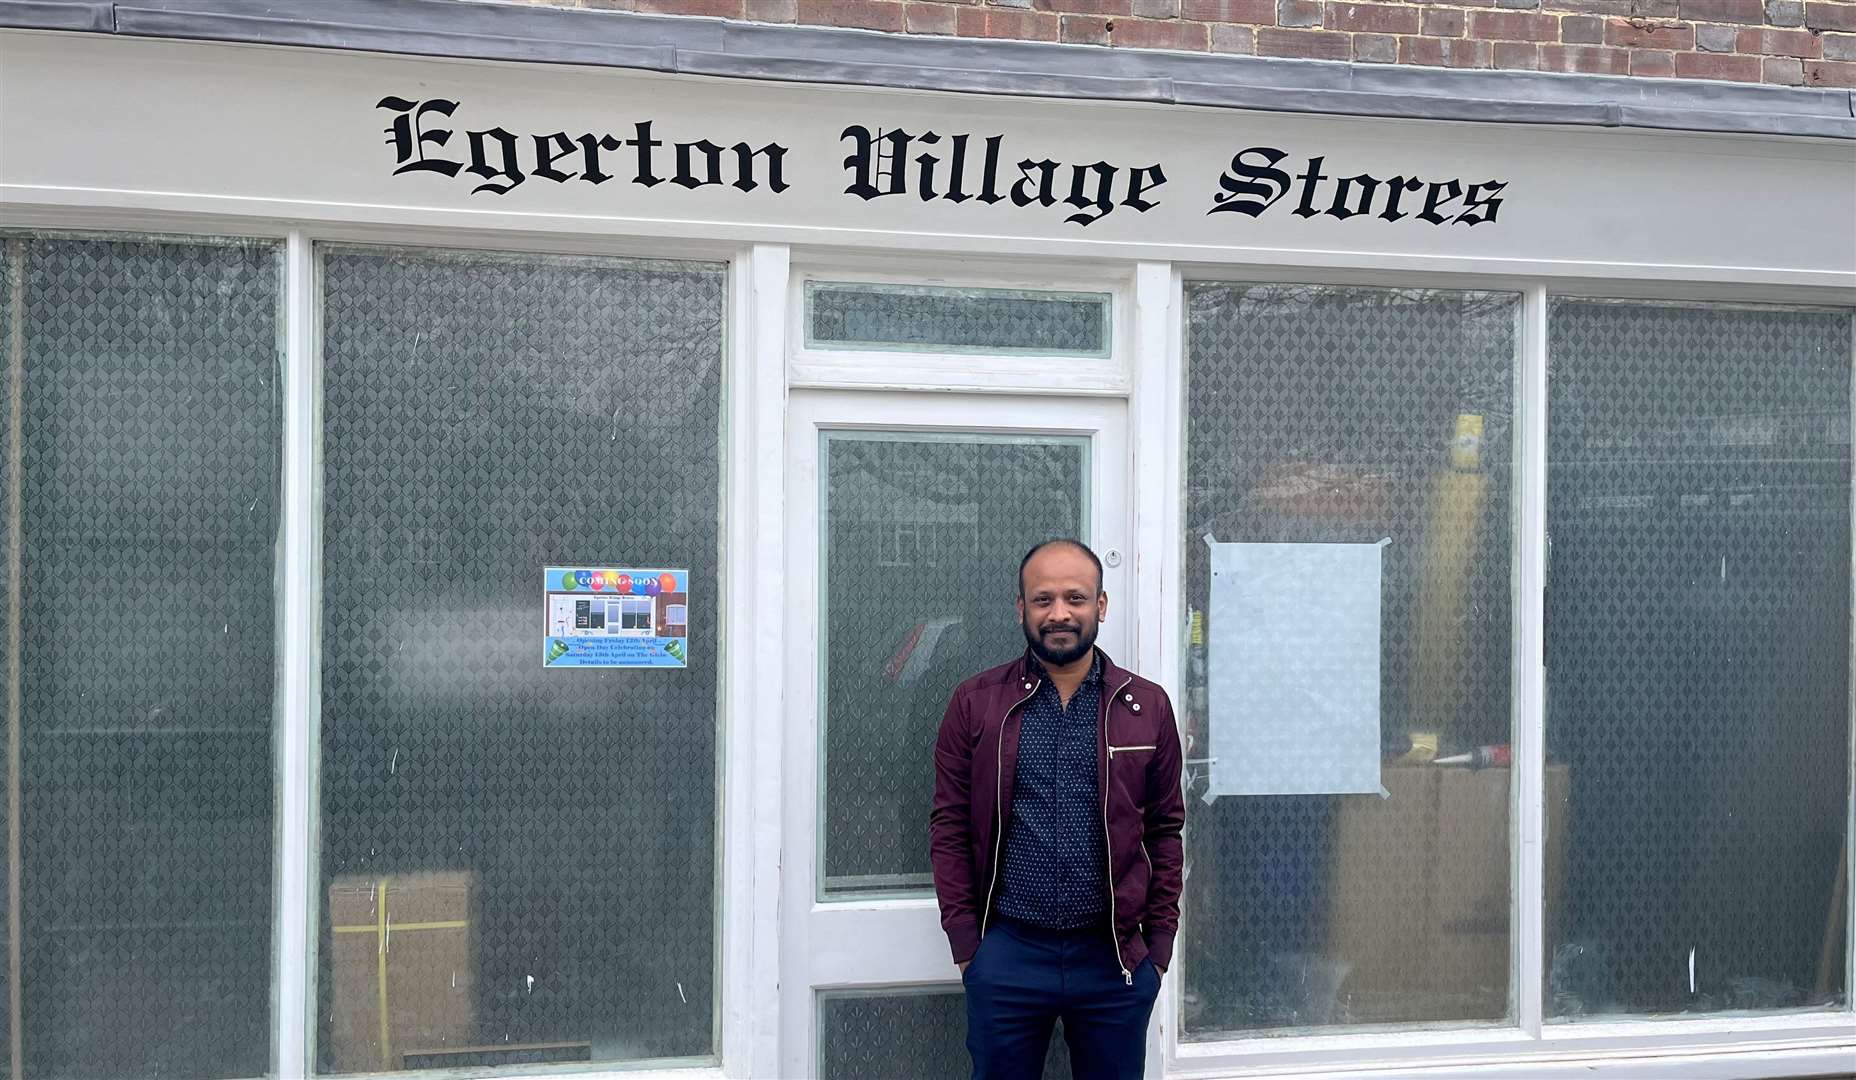 The Egerton Village Store will be least by Benet Kumar and is set to open from April 2024